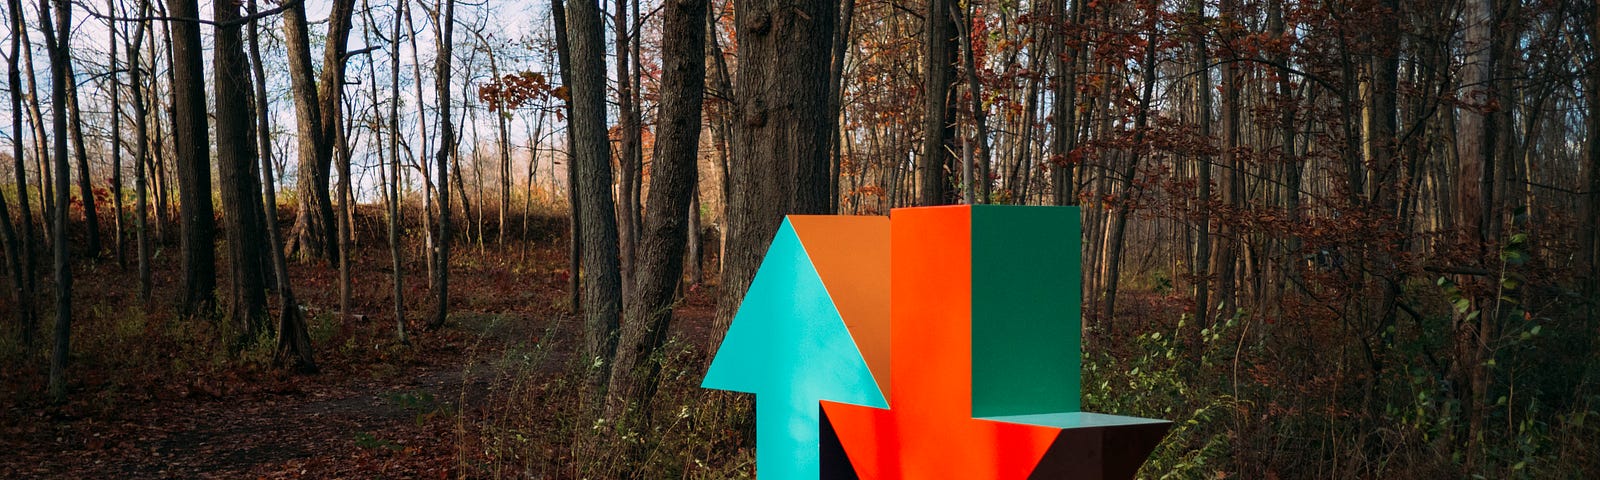 A picture of two arrows, sculpted out of metal perhaps, one orange and the other blue, in the woods on a concrete platform. The orange arrow is pointing down, the blue arrow up.